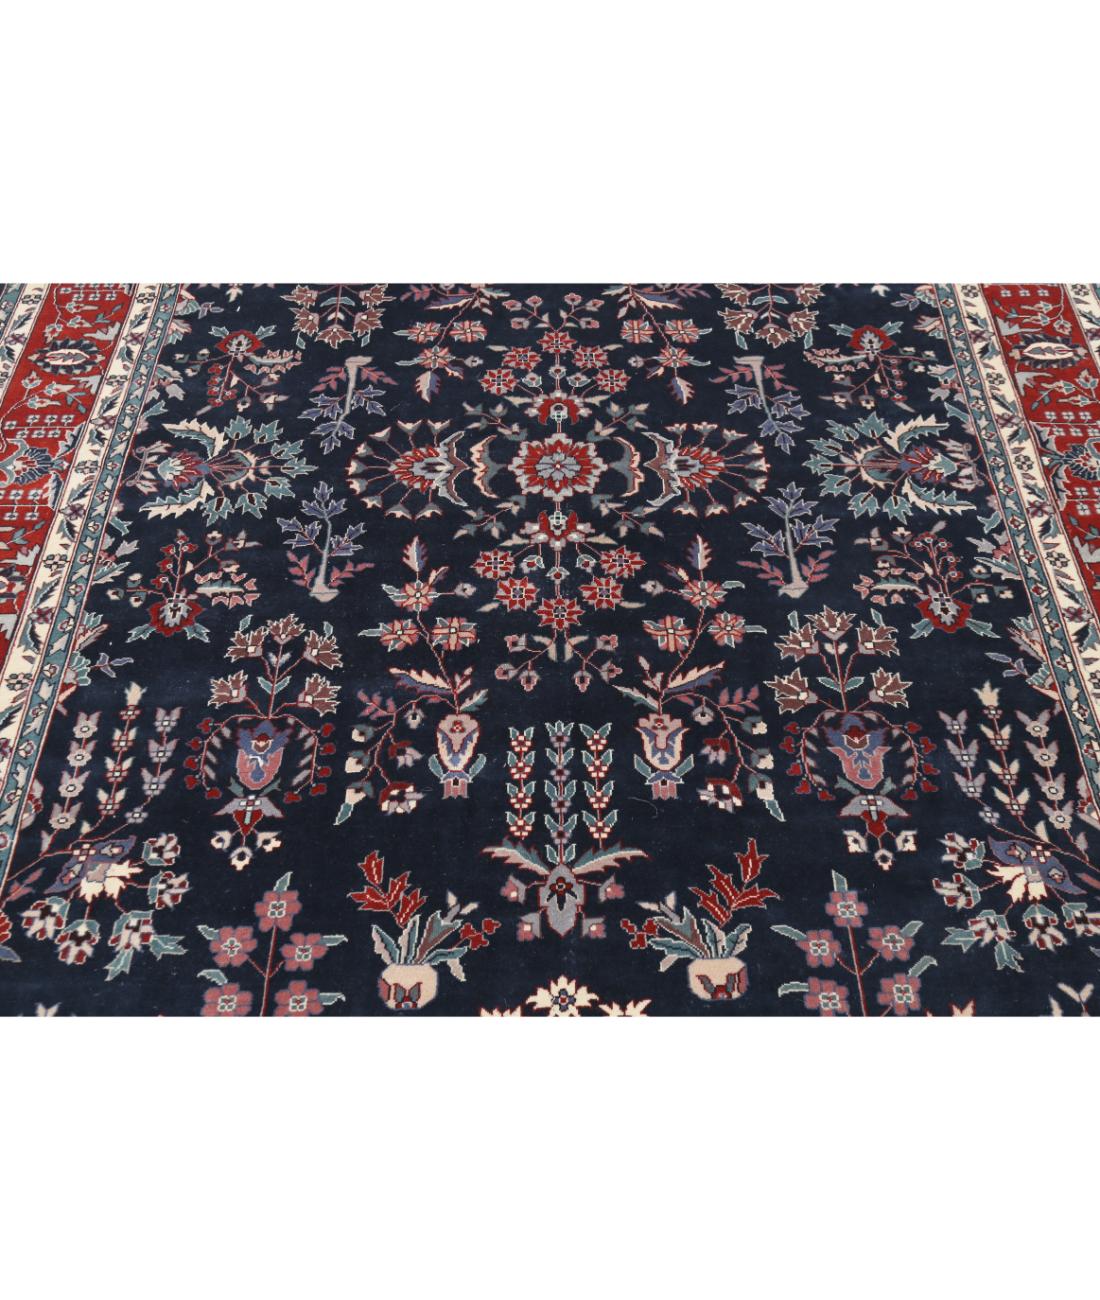 Hand Knotted Heritage Persian Style Wool Rug - 6'0'' x 9'1'' 6' 0" X 9' 1" (183 X 277) / Blue / Red